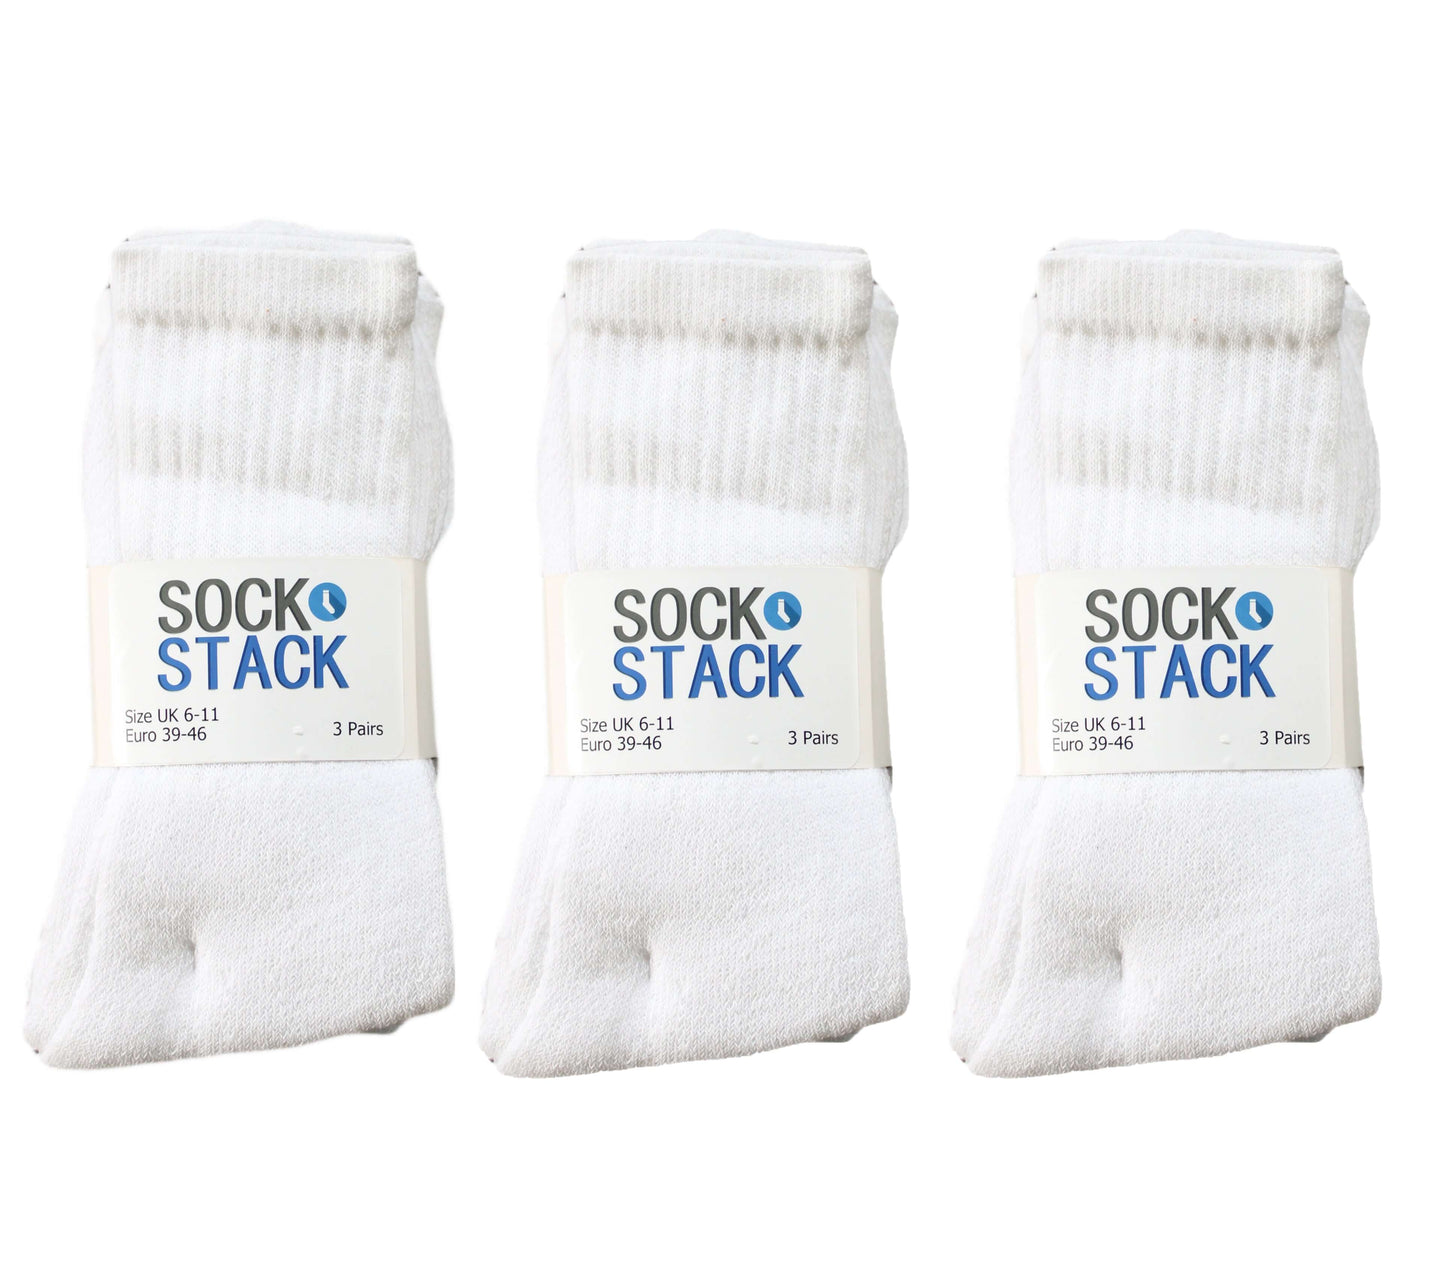 15 Pairs Of Men's Sport Socks, Black White Blue Grey Cotton Rich Performance Socks. Buy now for £8.00. A Socks by Sock Stack. 6-11, assorted, black, blue, boot, boys, comfortable, cosy, cotton, cushion sole, grey, grey socks, mens, office, running, socks,